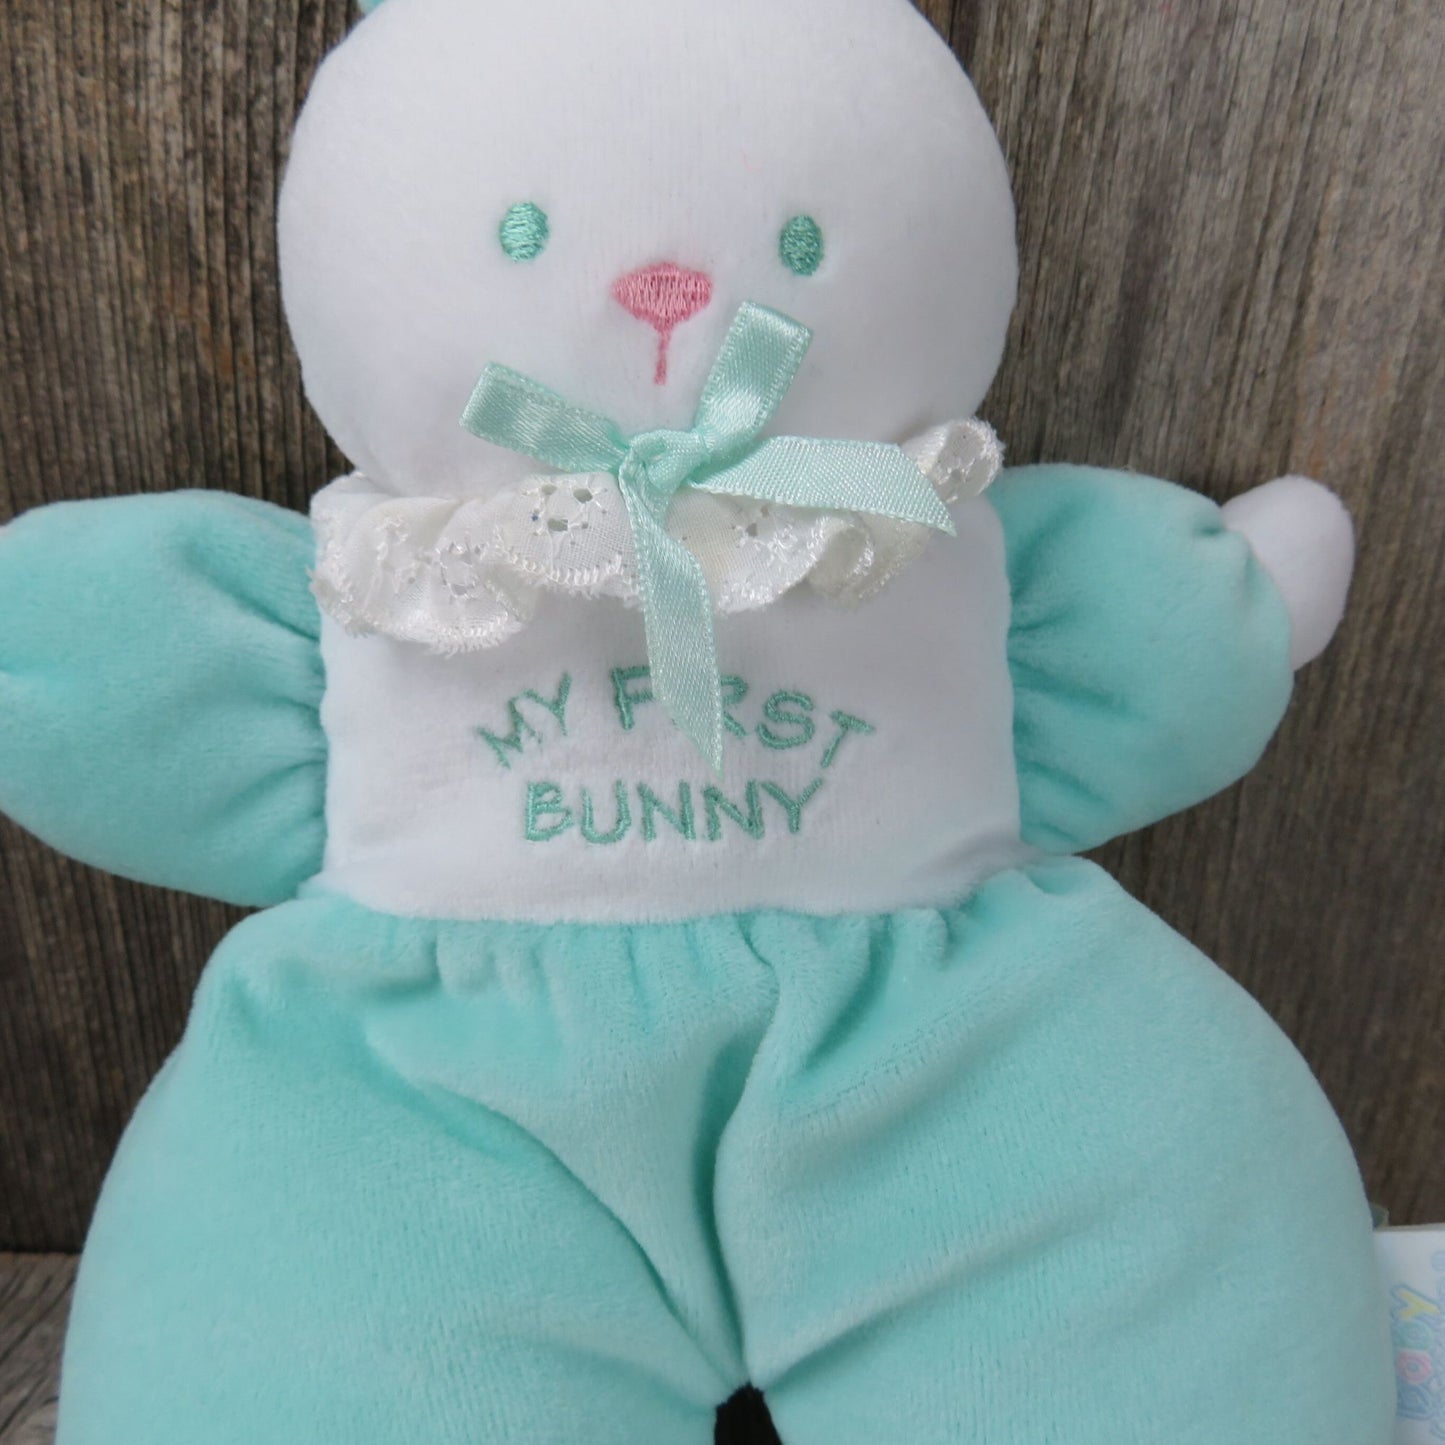 My First Bunny Plush Rattle Green White Velour Rabbit Baby Connection Stuffed Animal